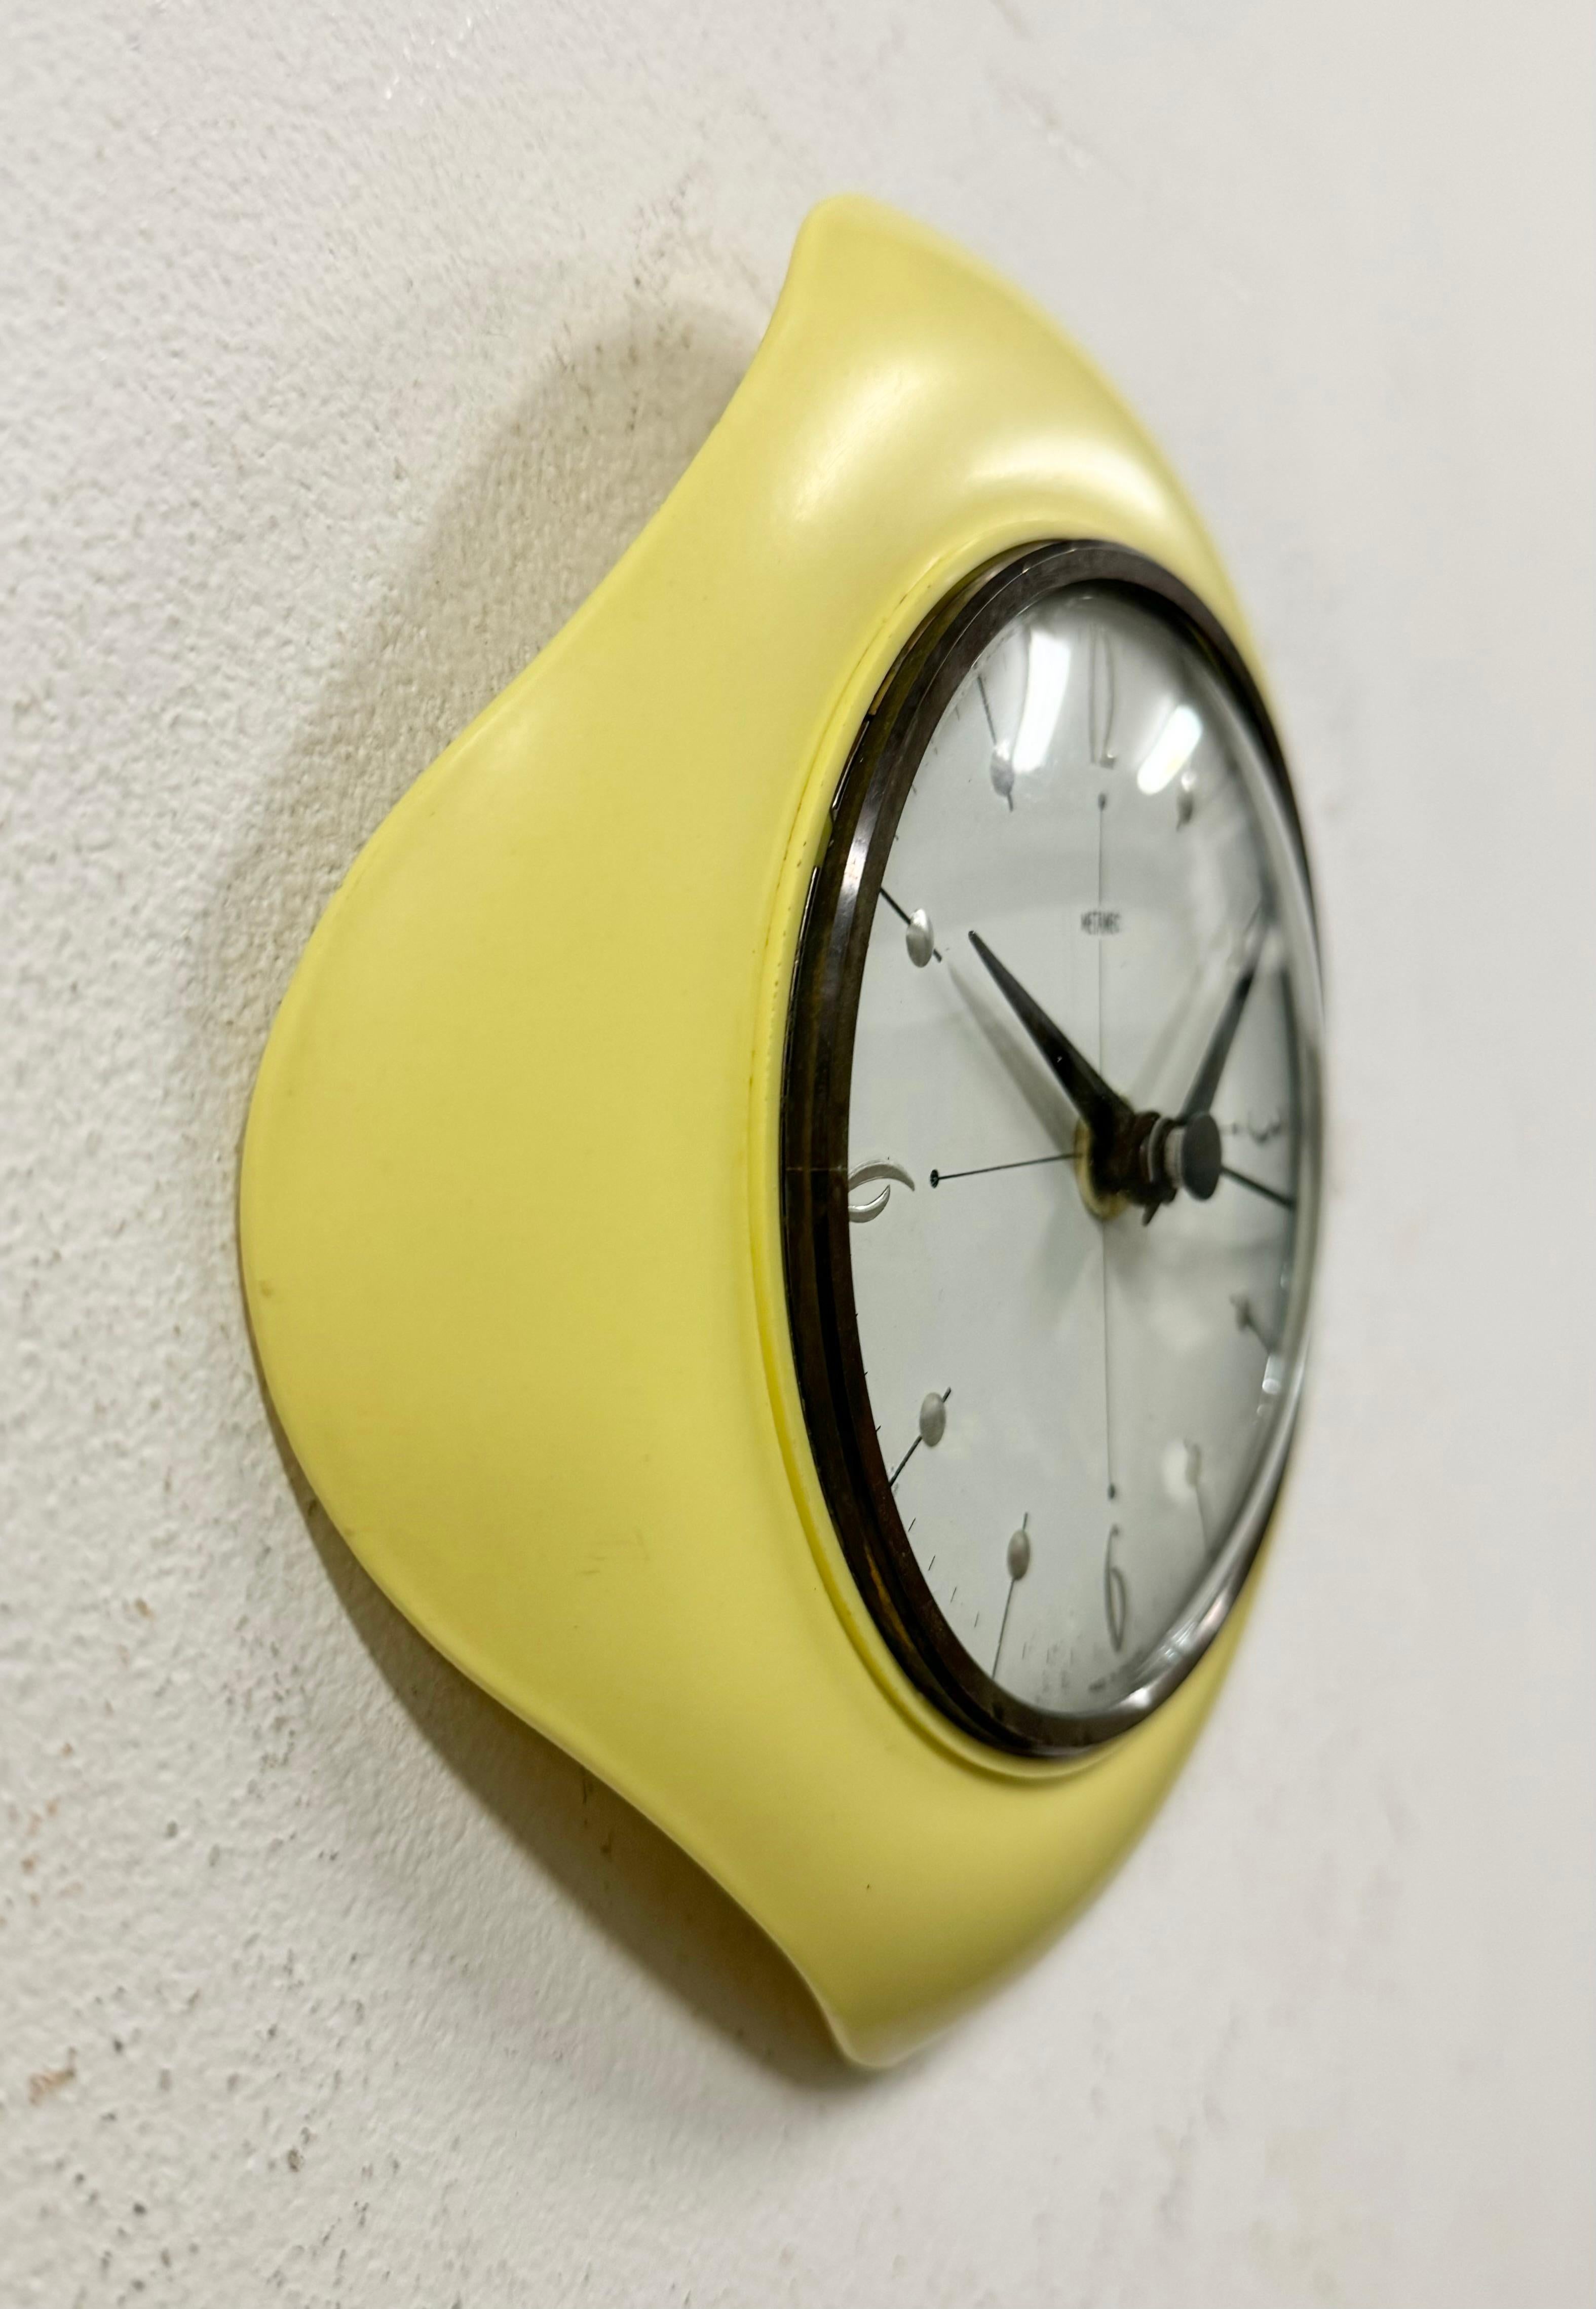 Vintage Yellow Bakelite Wall Clock from Metamec, 1970s In Good Condition For Sale In Kojetice, CZ